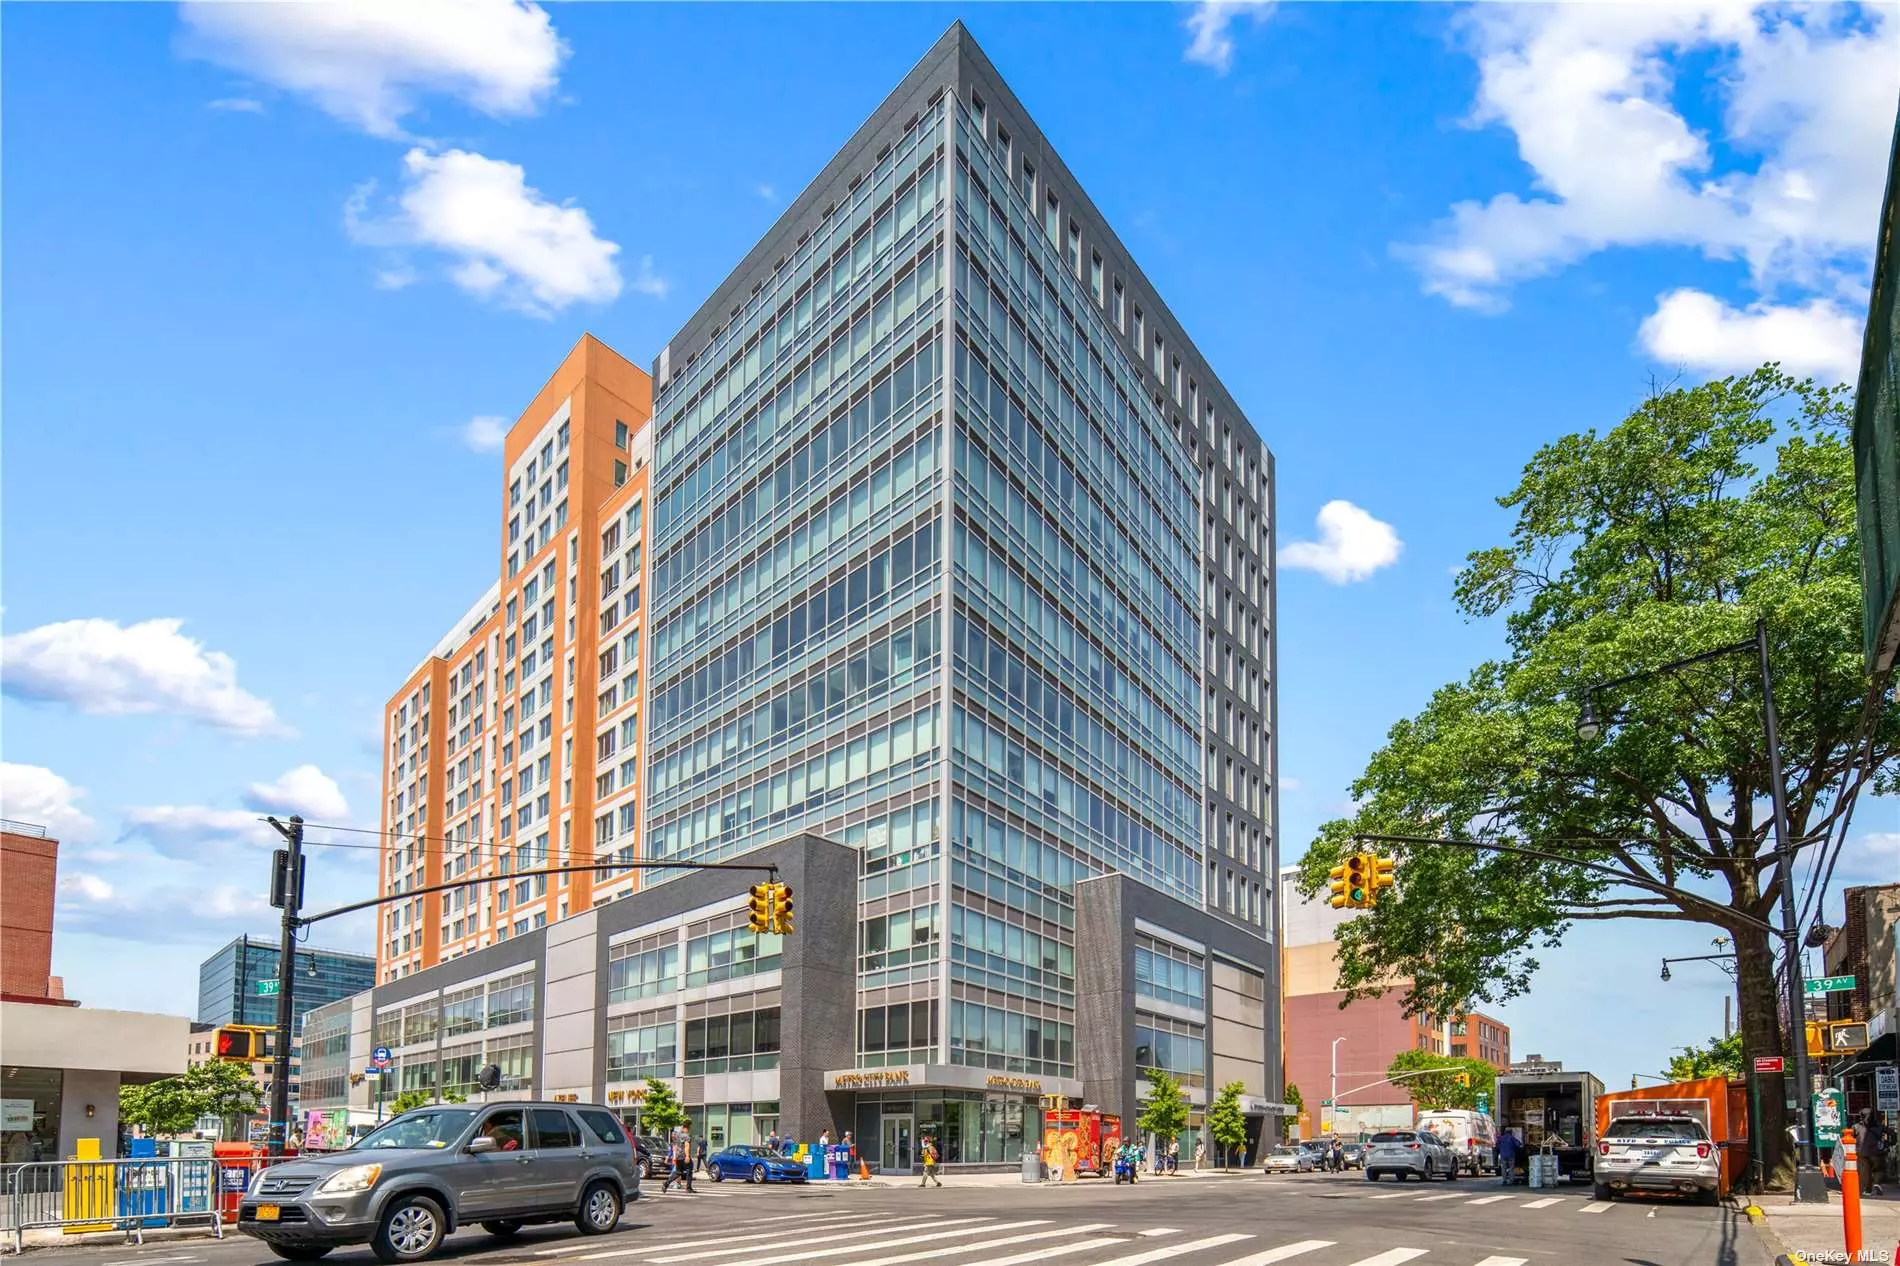 The south facing renovated office space ideally for all types of business use, located in downtown Flushing. This building offers a separate entrance, 24/7 access, doorman and security. With easy access to the #7 Subway, LIRR, and bus stops. Parking garage directly connects to this building. Surrounded by restaurants, stores, shops and convenient to all.